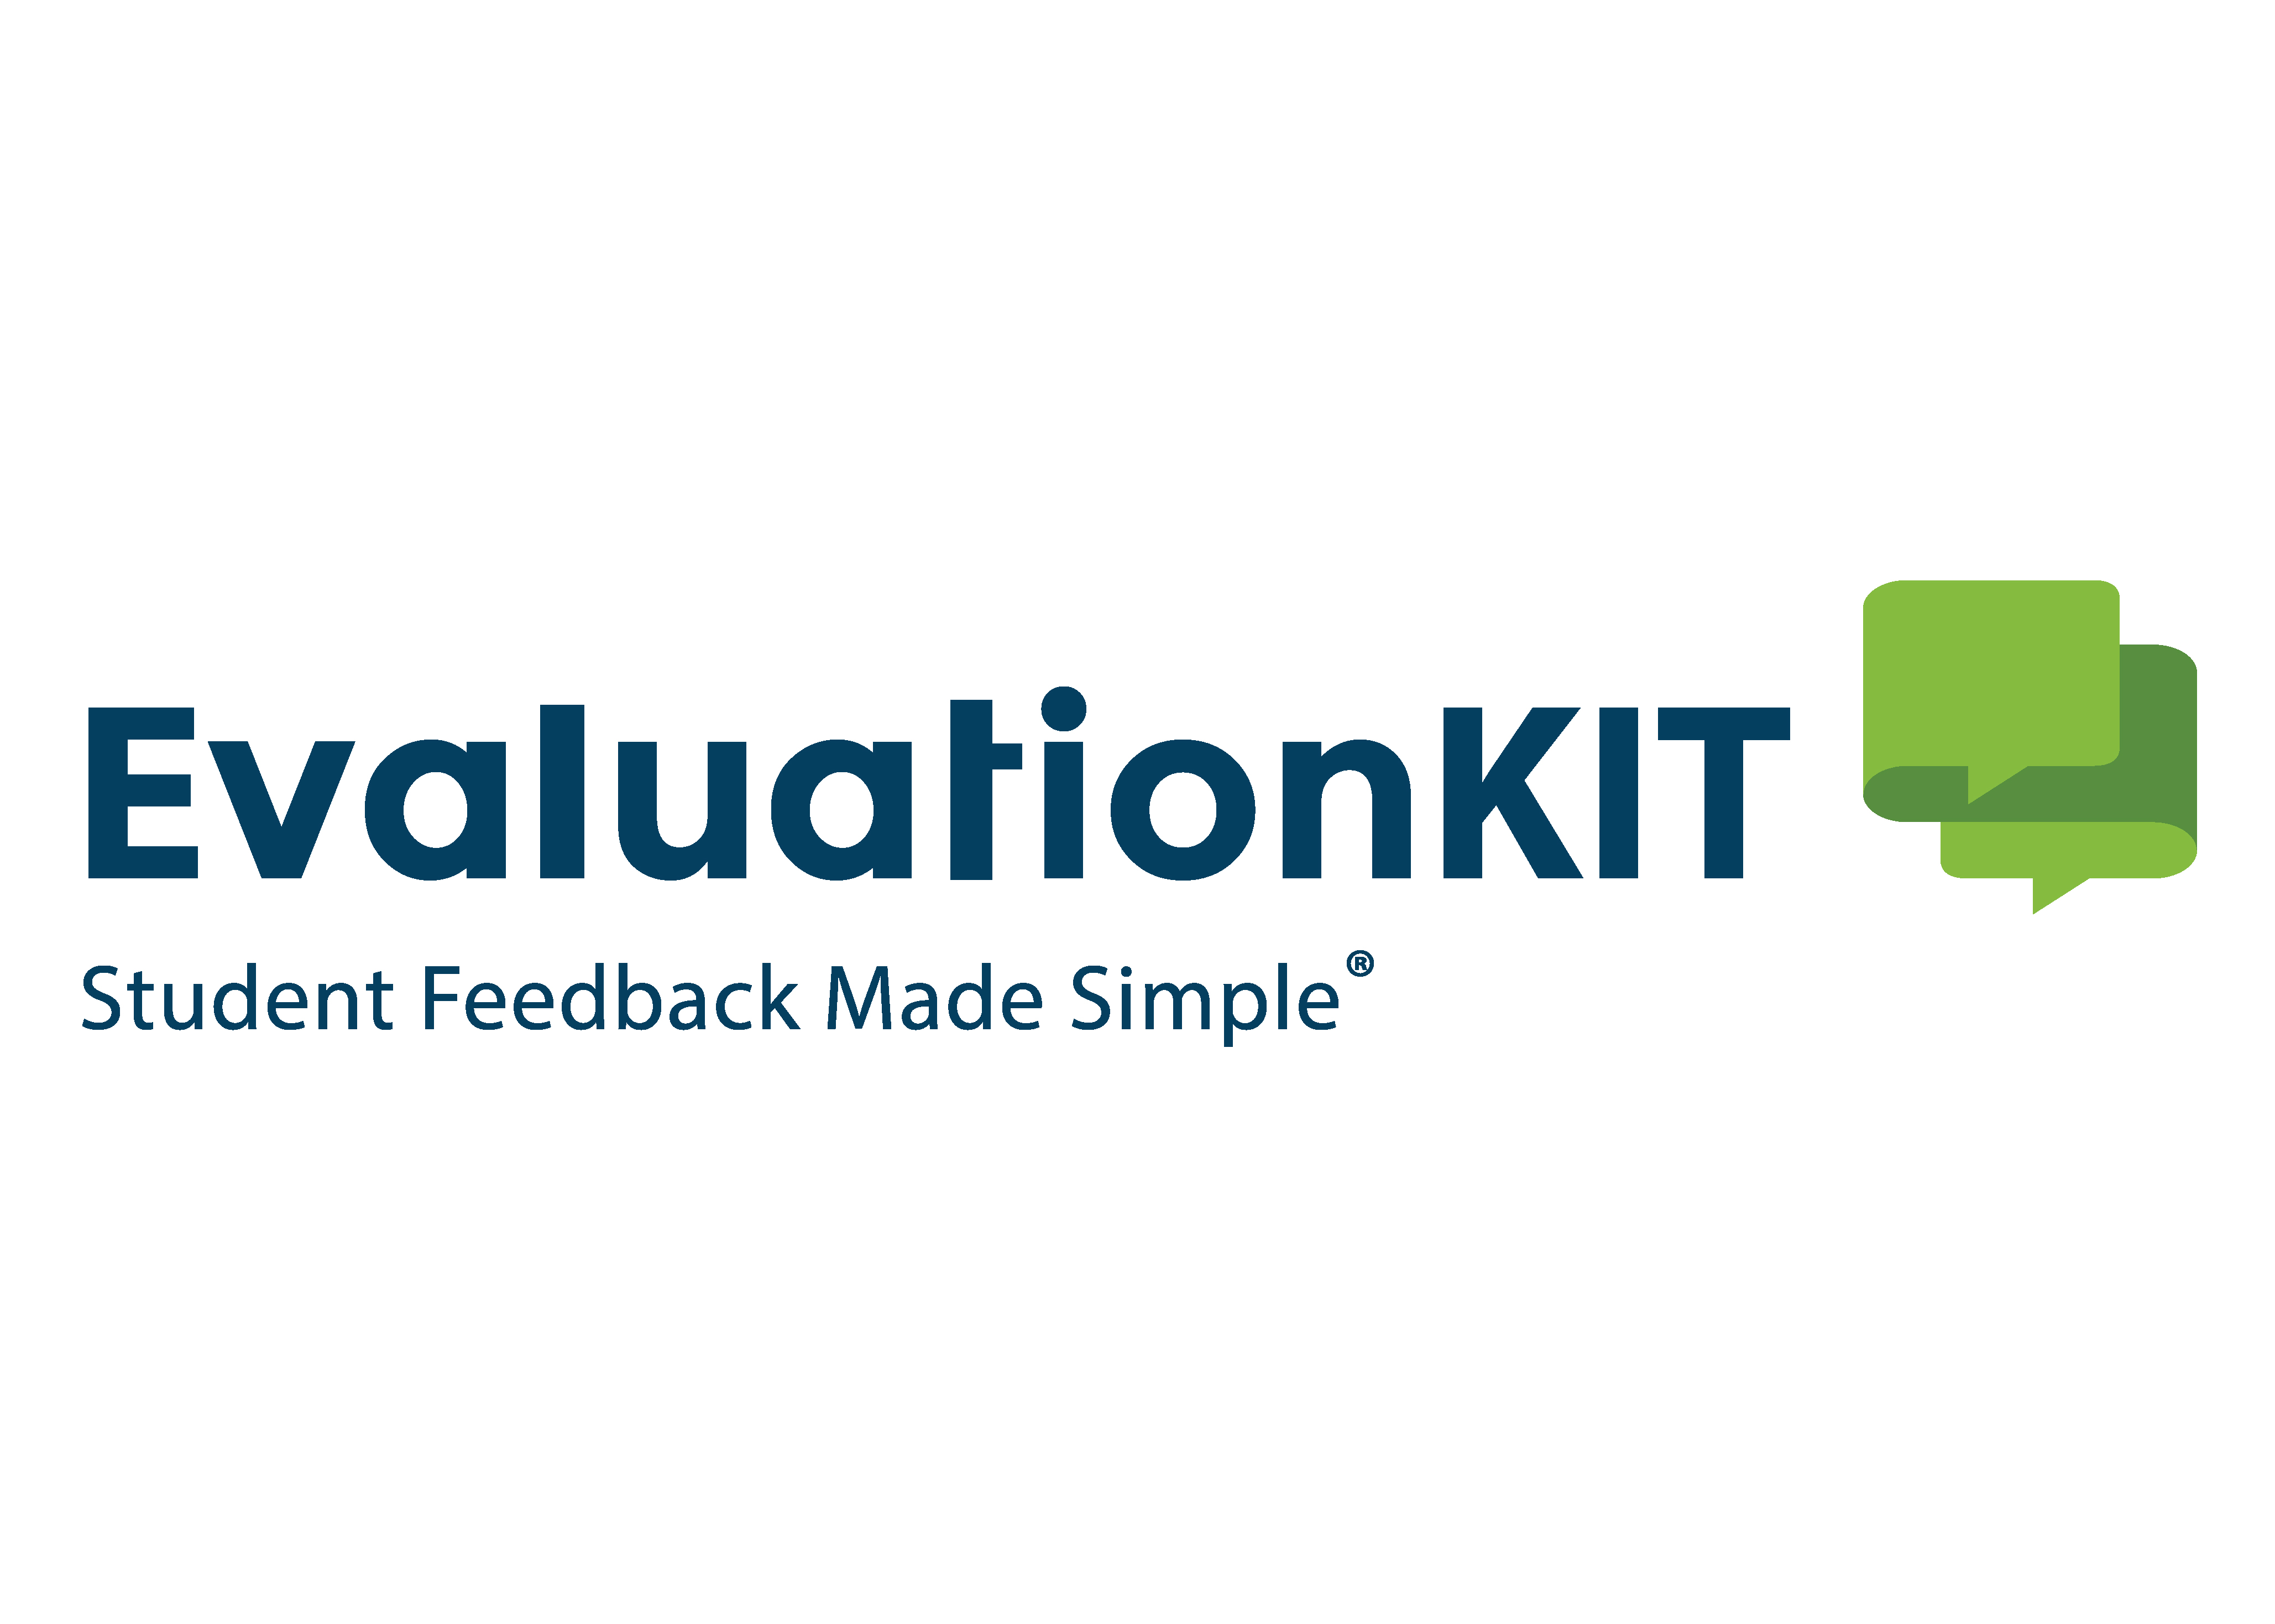 The university uses EvaluationKIT for its Student Learning Experience Survey.